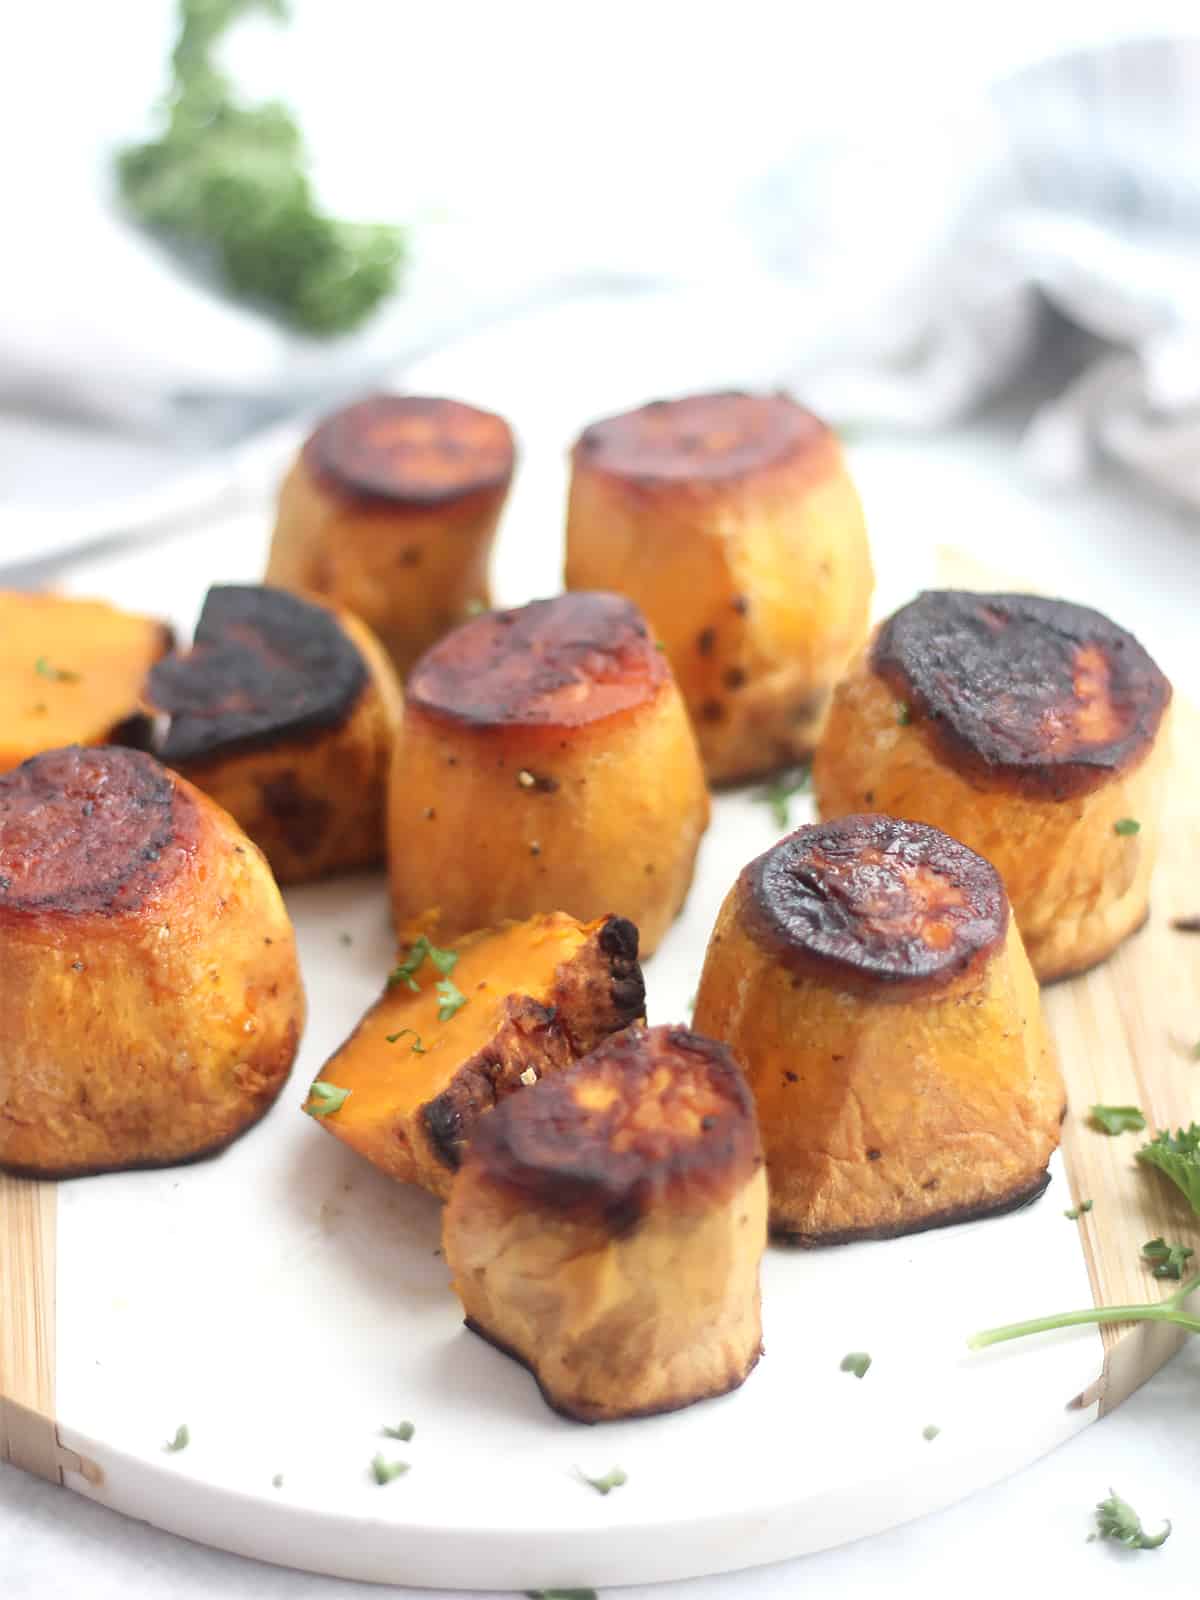 Eight fondant sweet potatoes with two cut in half.